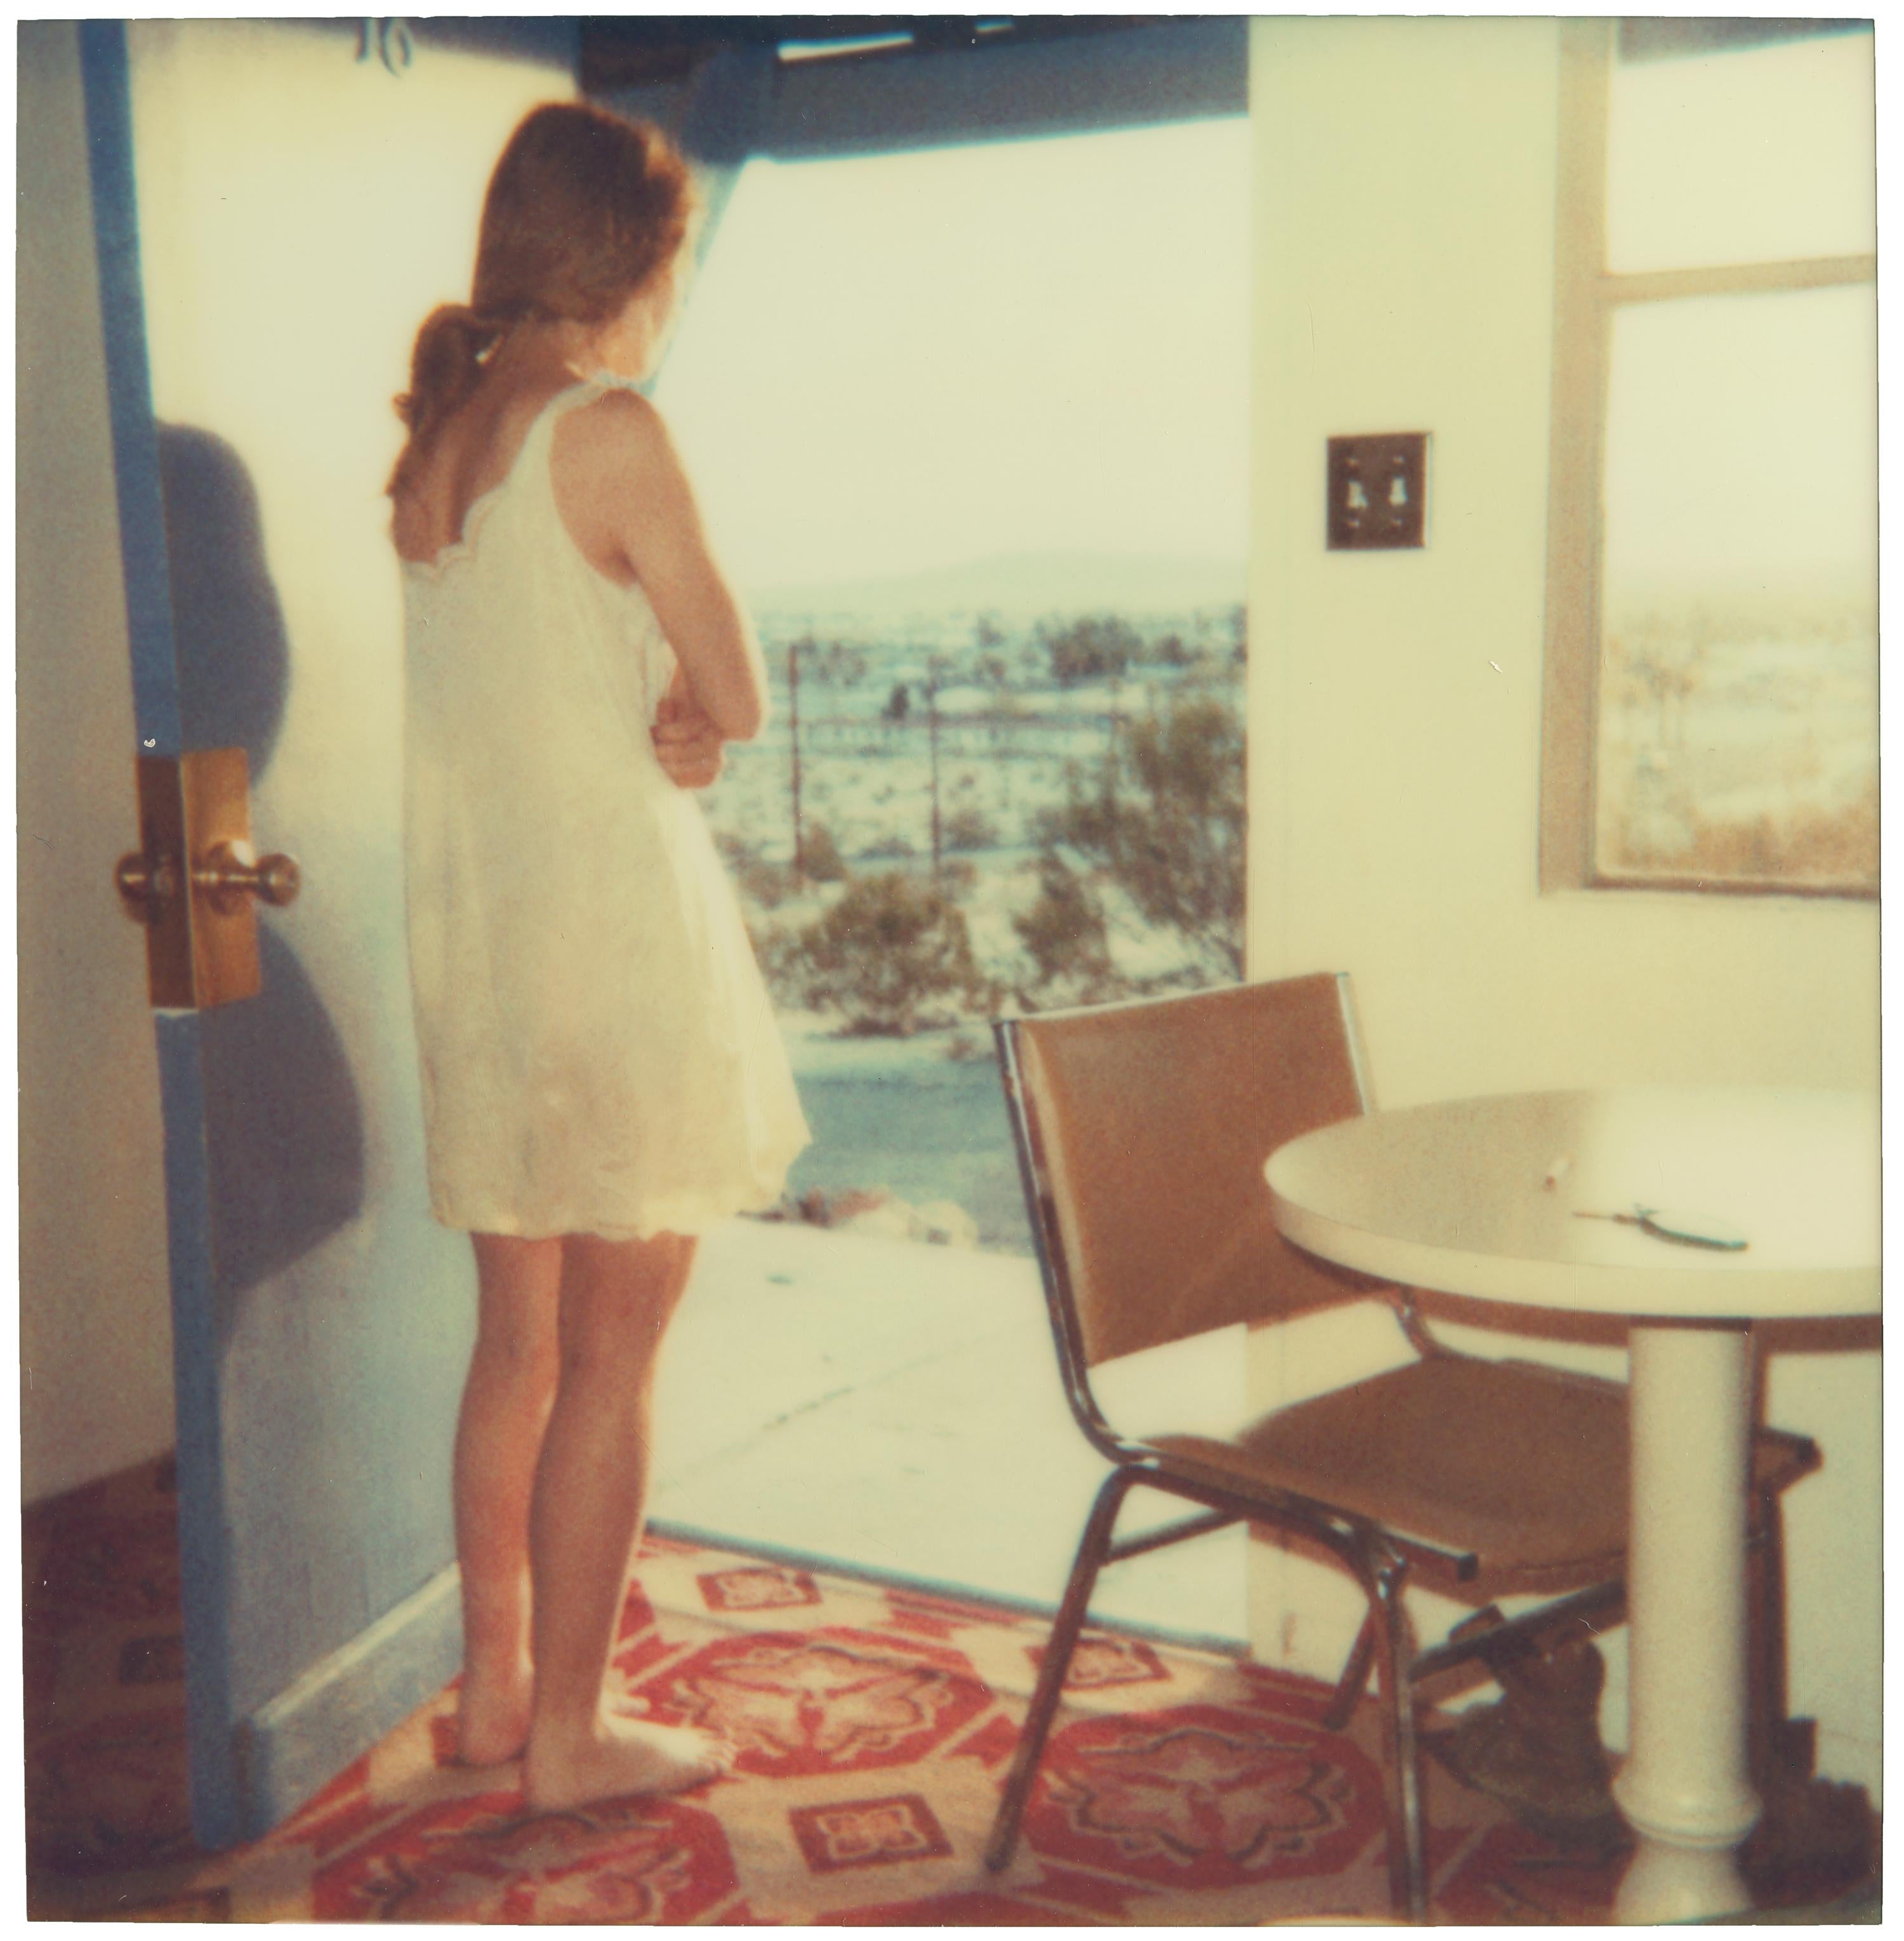 Hillview Motel (Last Picture Show) - analog, mounted, based on 3 Polaroids - Brown Portrait Photograph by Stefanie Schneider